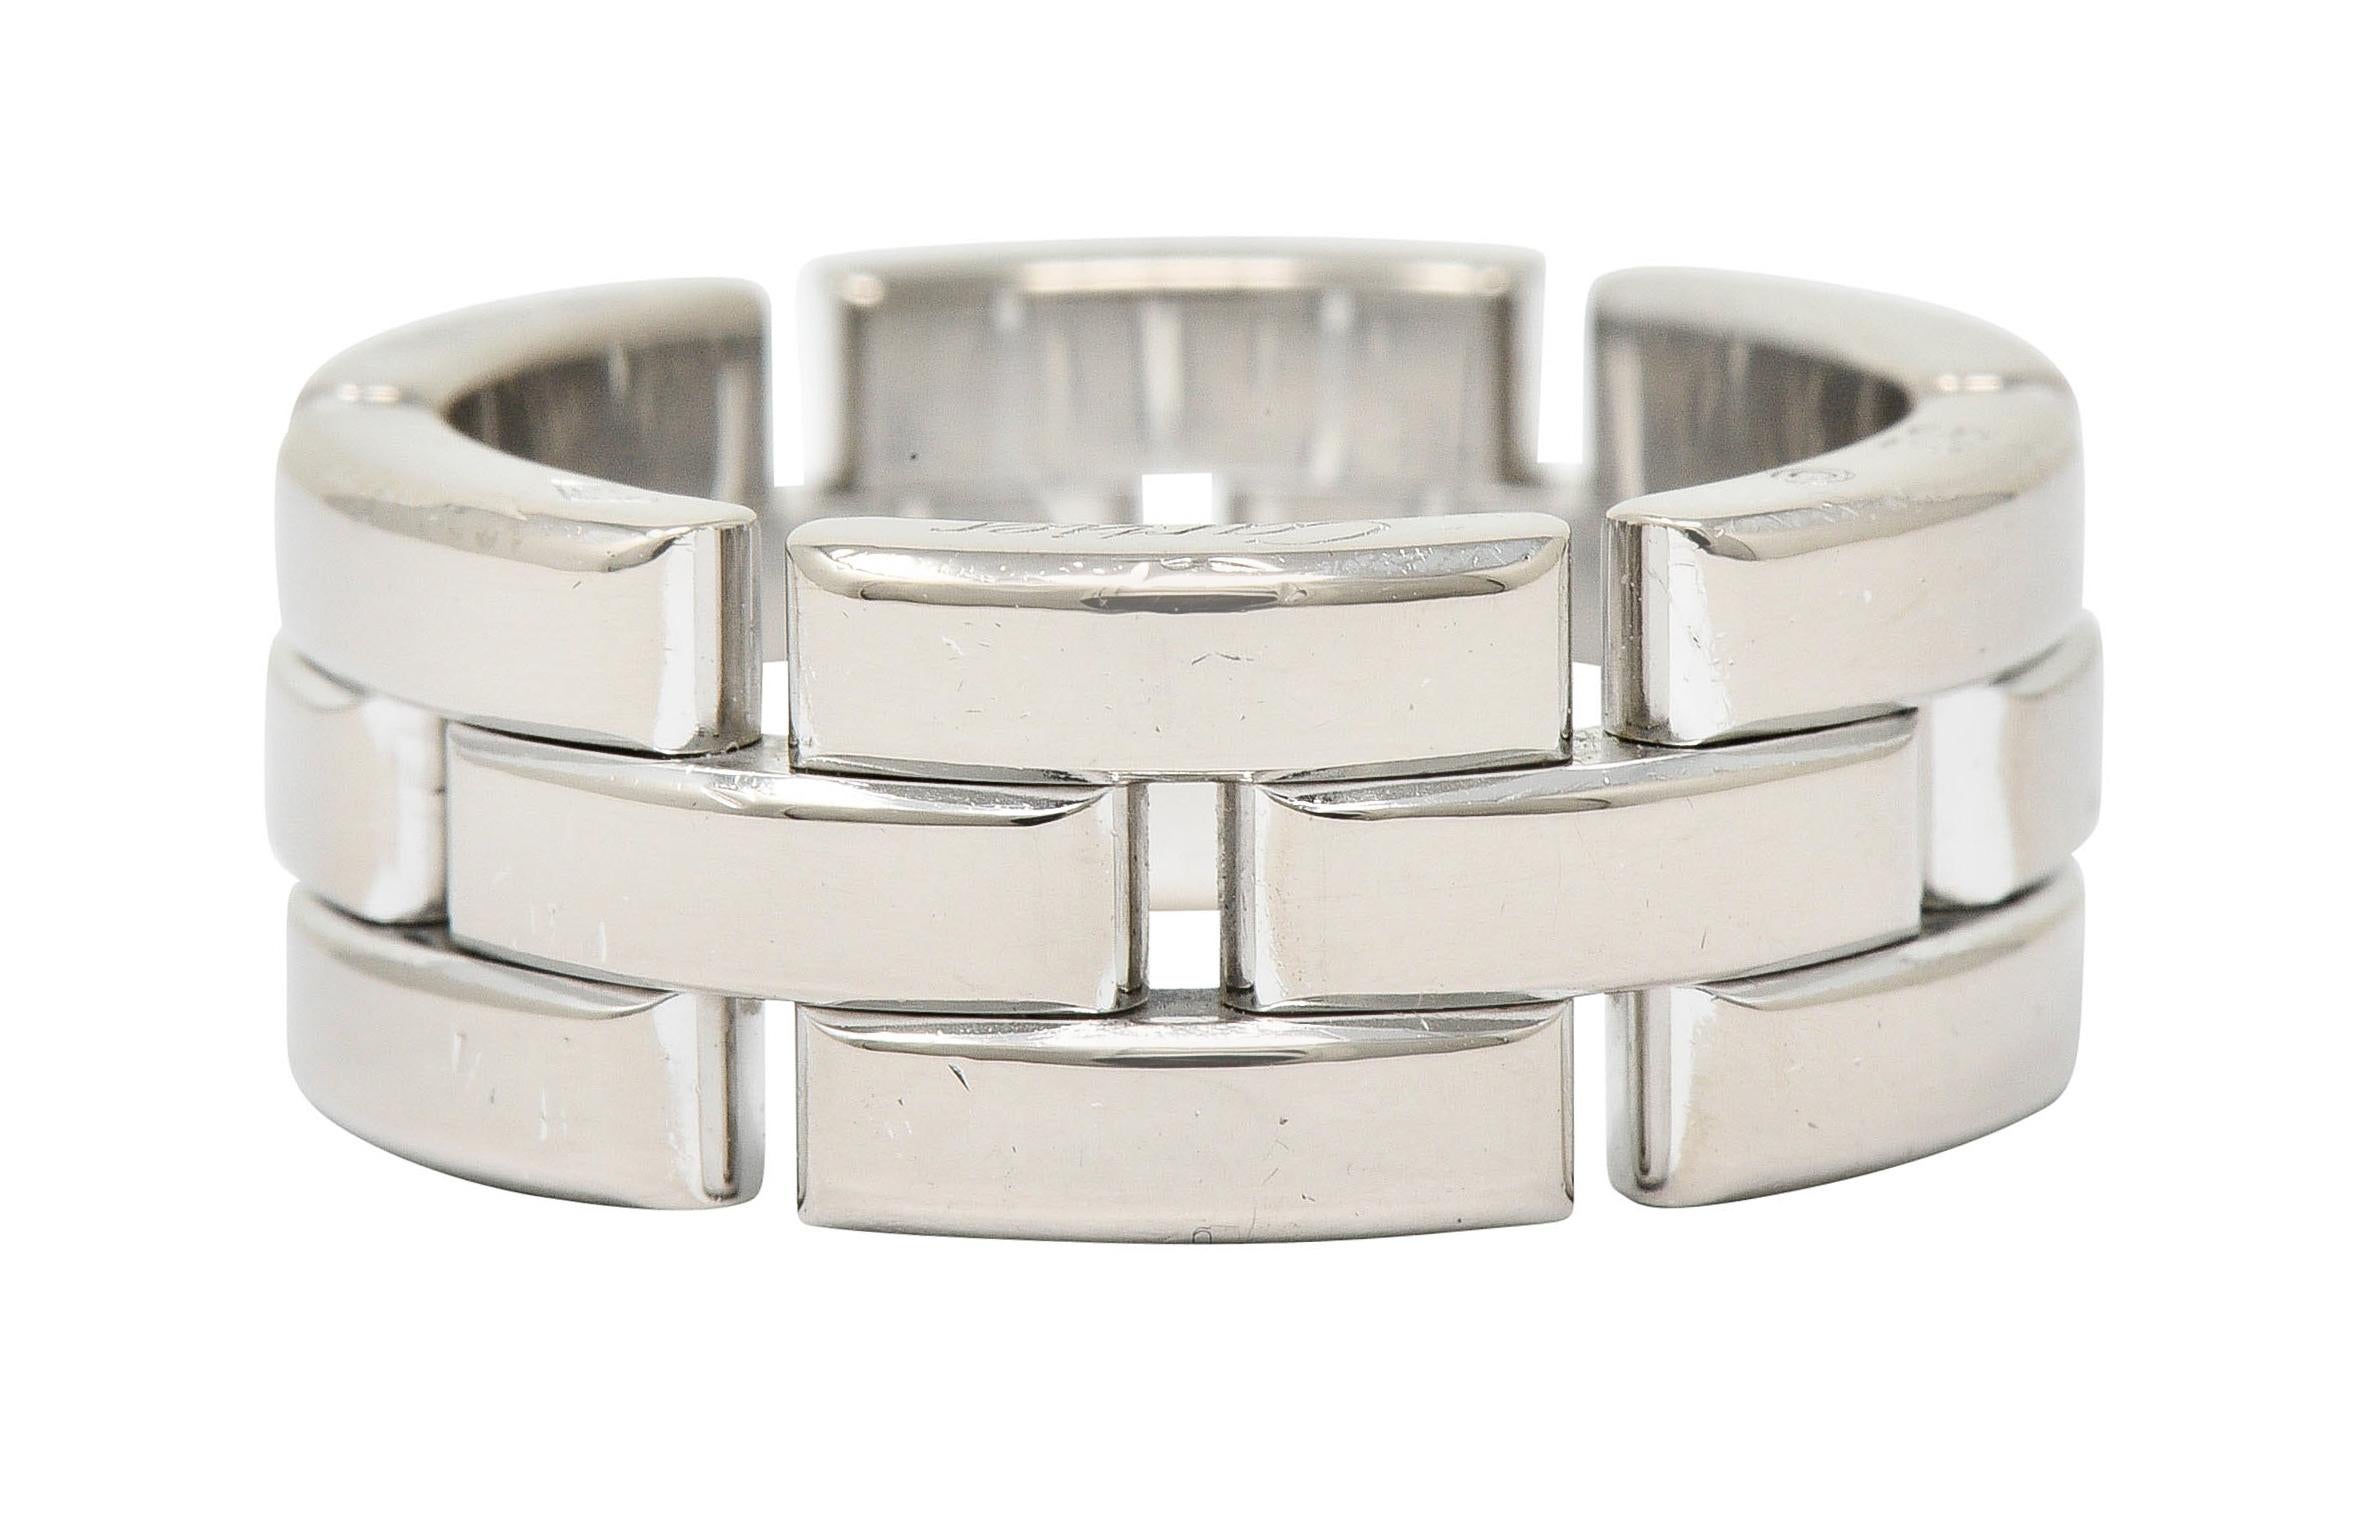 Wide band ring is designed as interlocking rectangular forms

With a brightly polished finish

Numbered, fully signed Cartier, and with French maker's mark

Stamped 750 and with French assay marks for 18 karat gold

From the contemporary Maillon